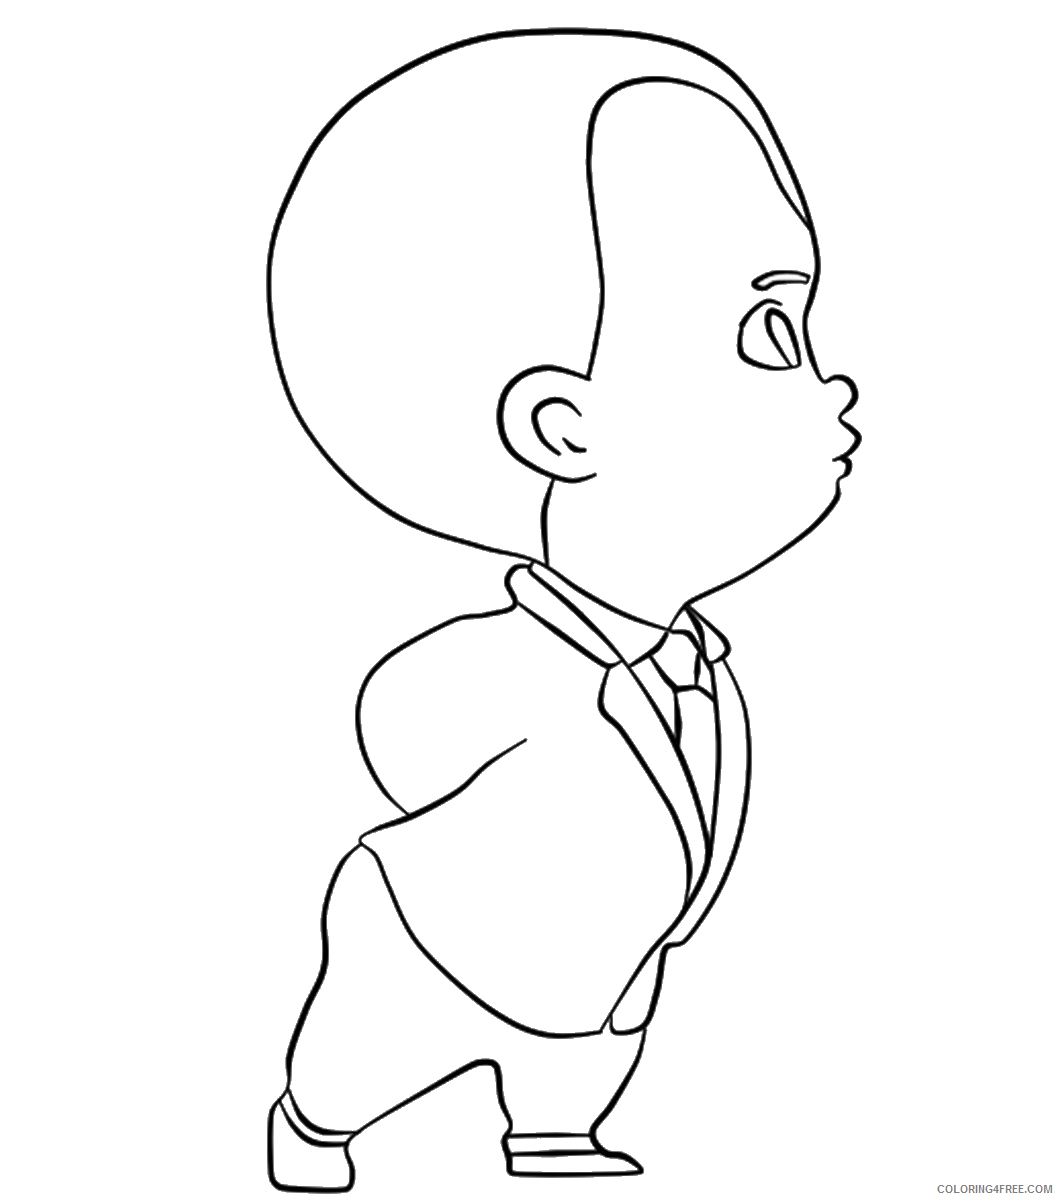 Boss Baby Coloring Pages TV Film the boss baby3 Printable 2020 01282 Coloring4free